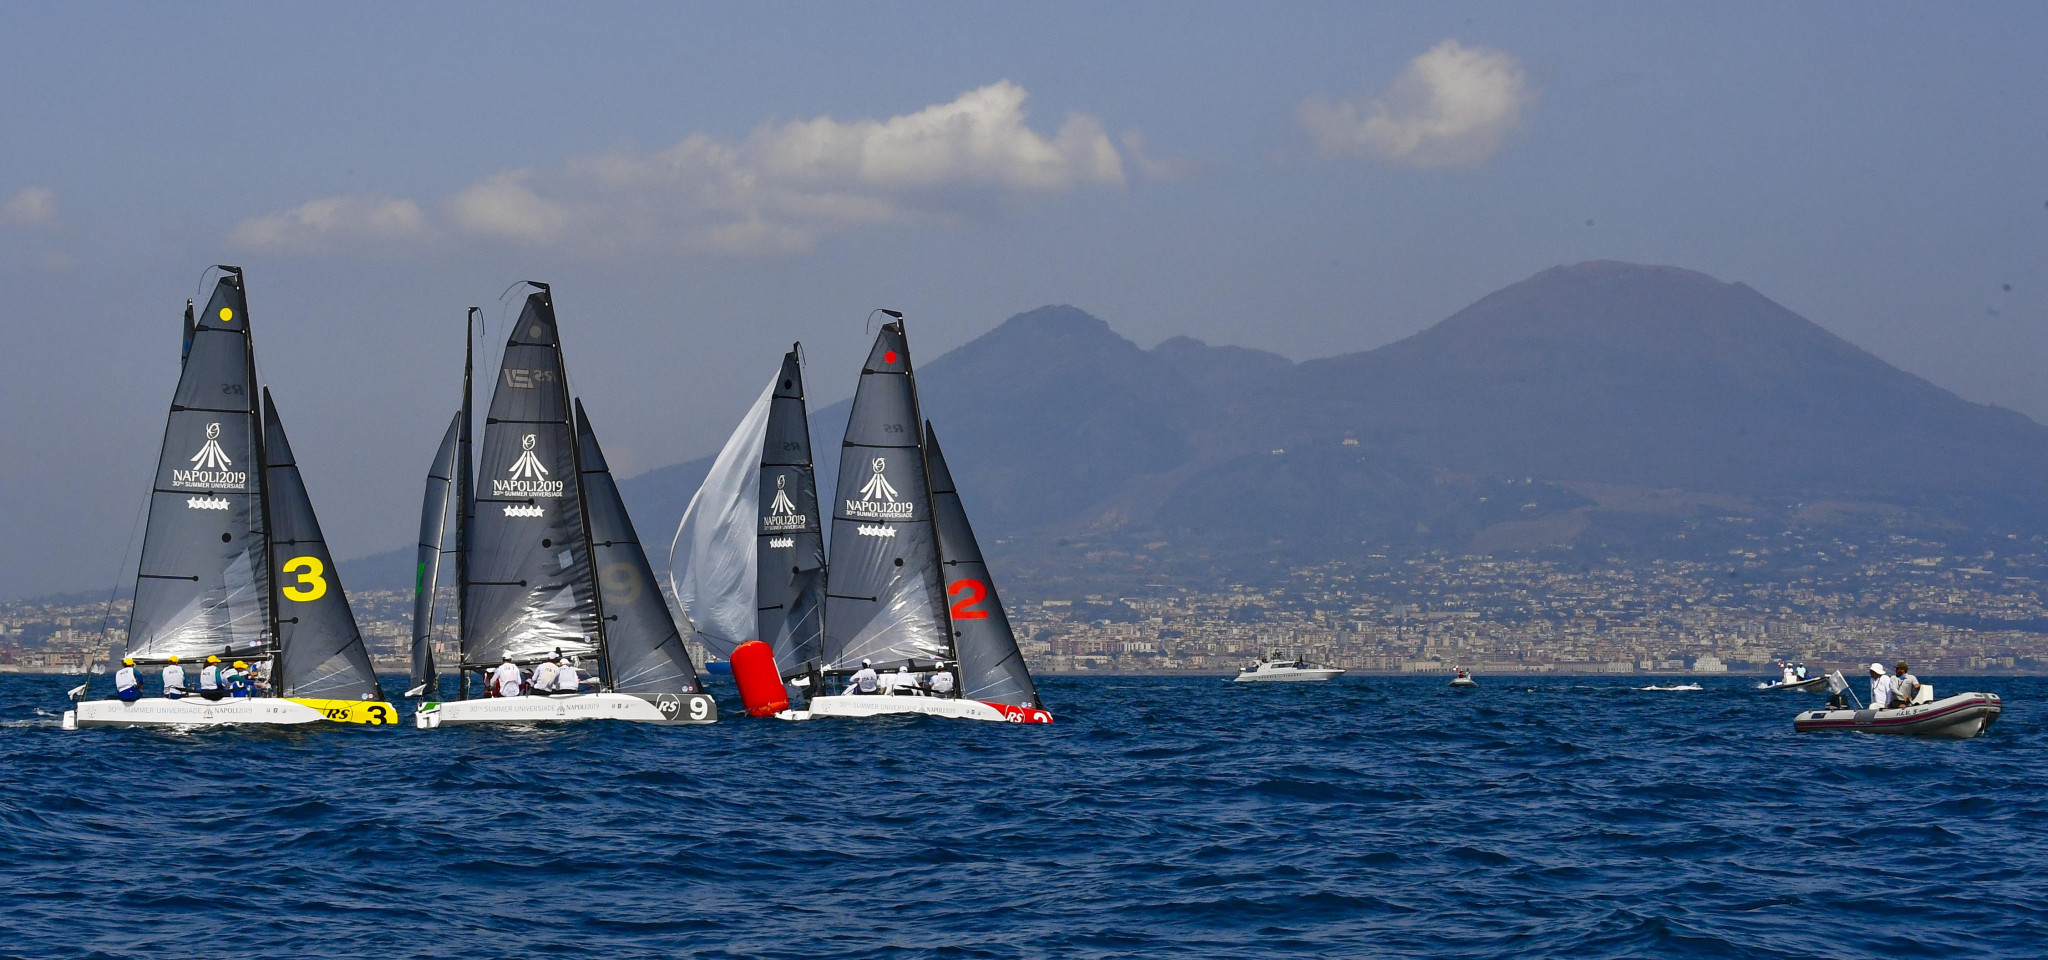 Competitors took to the water in the sailing qualifying events, with Mount Vesuvius acting as a scenic backdrop ©Naples 2019